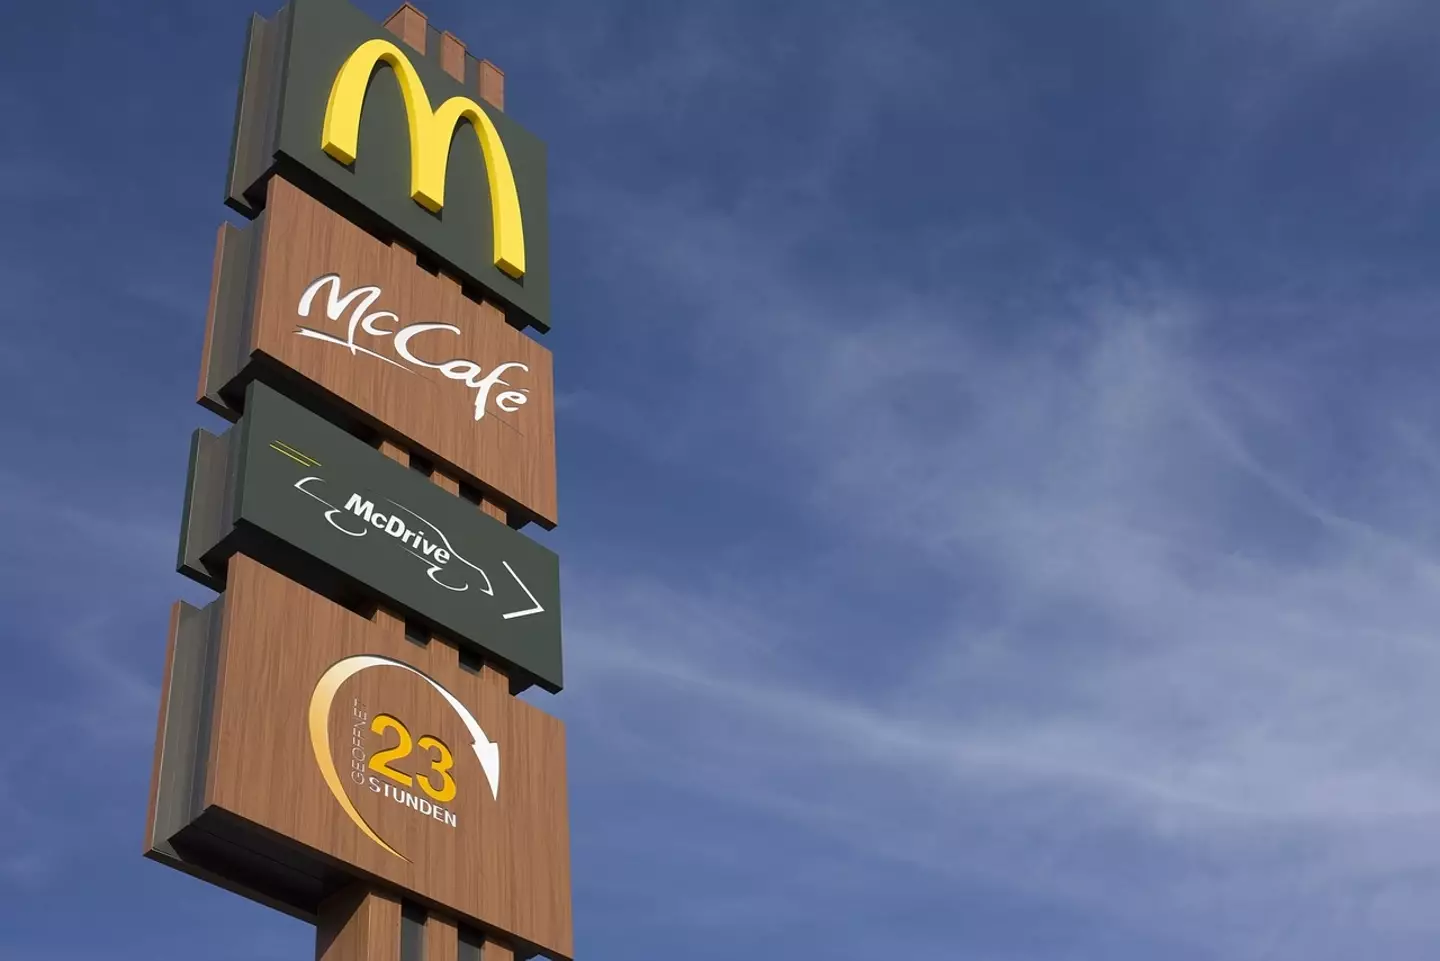 McDonald's is now famous for its golden arches.